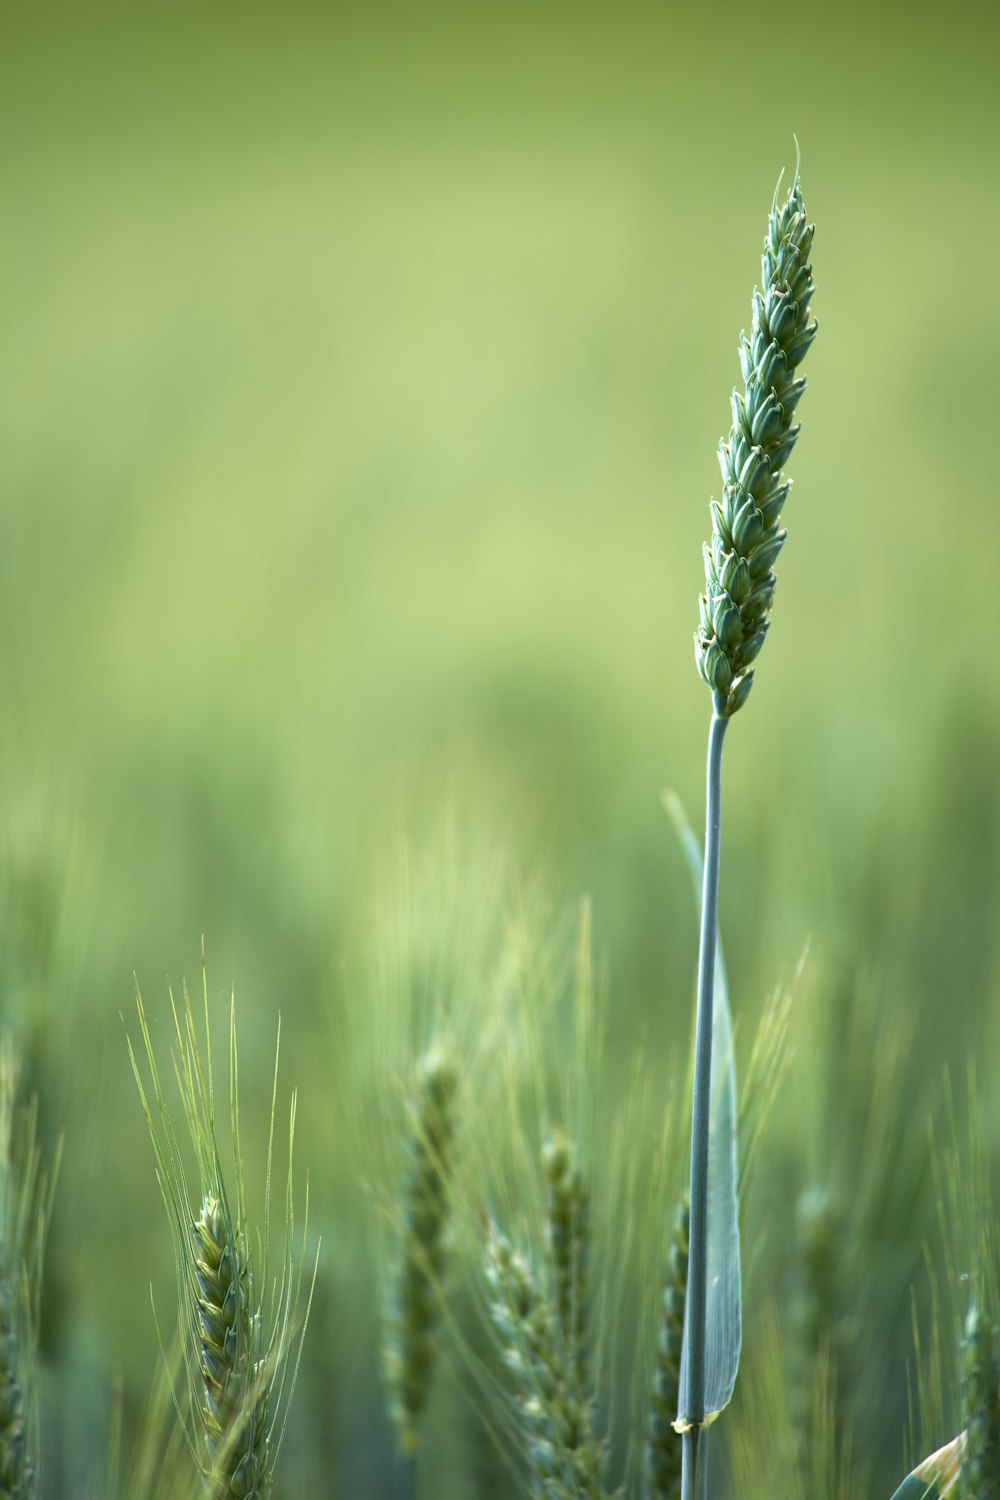 green wheat in close up photography